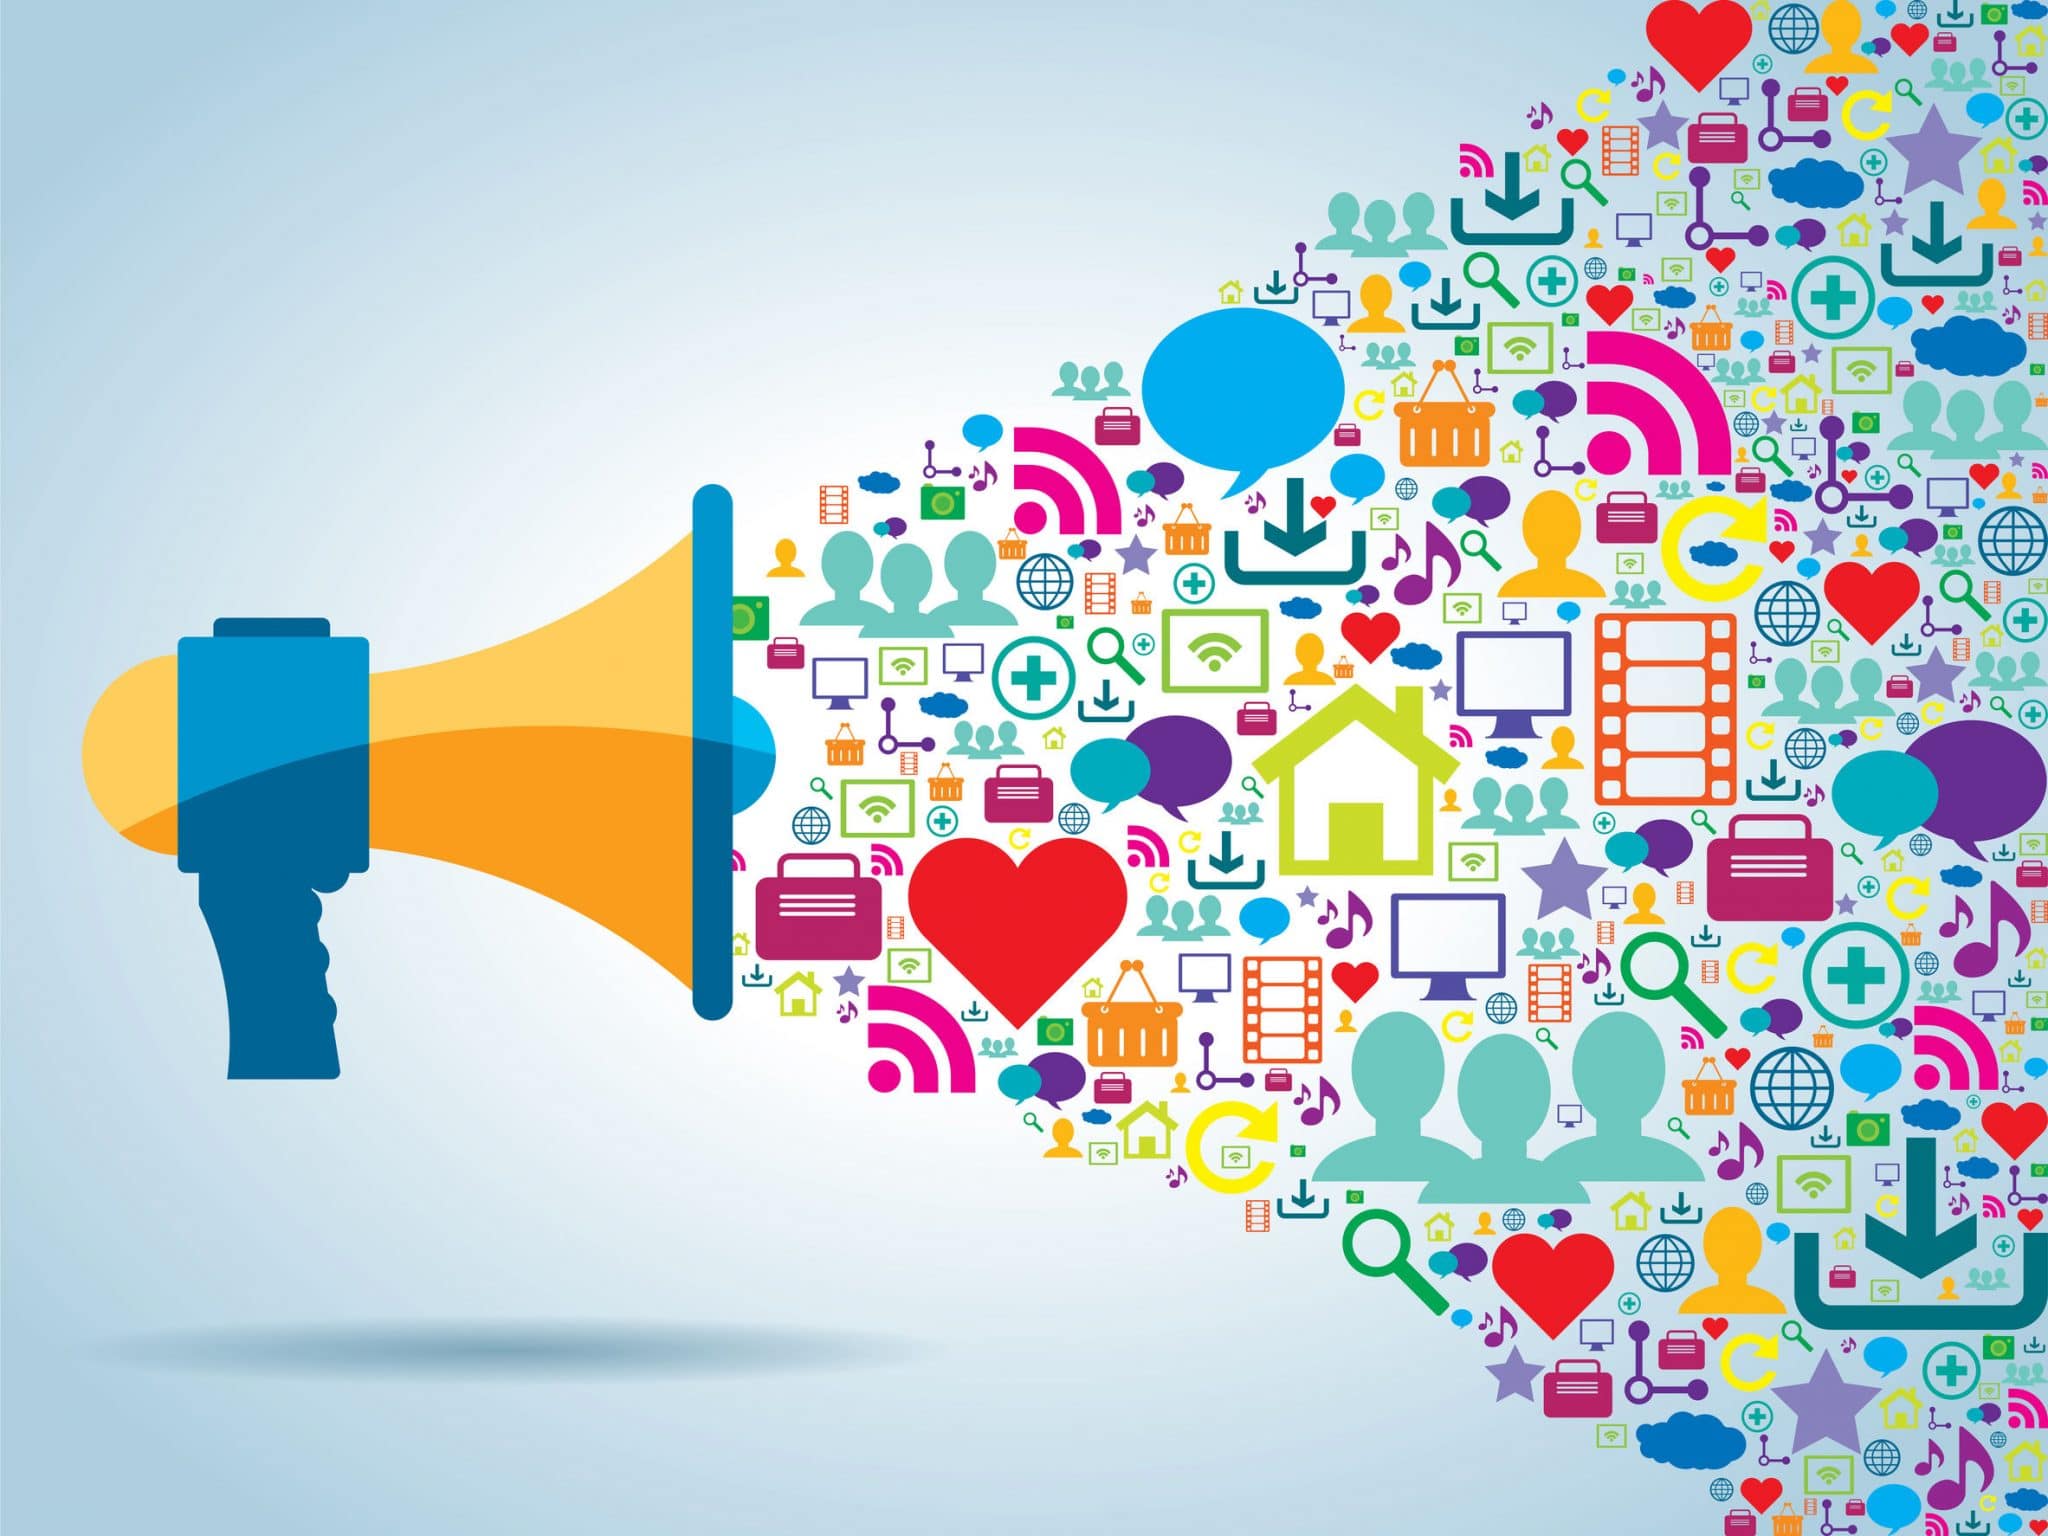 How to Run a Successful Social Media Advertising Campaign